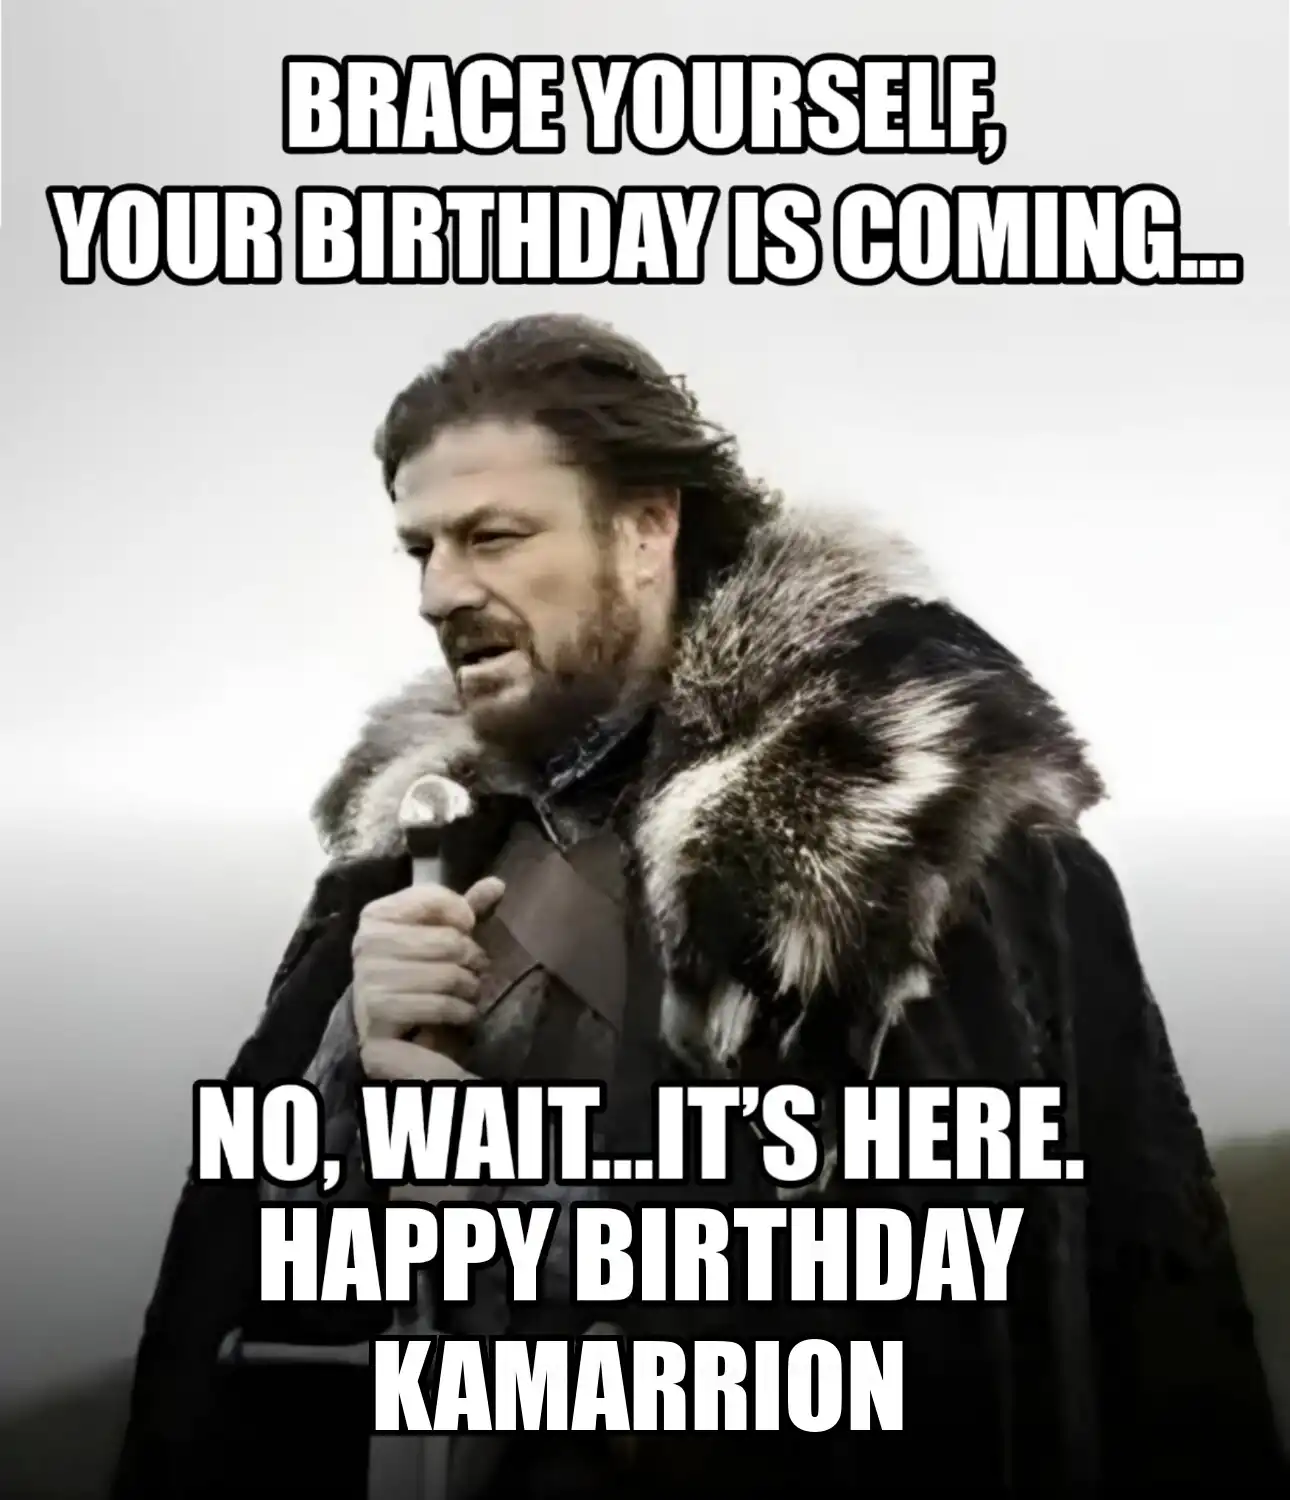 Happy Birthday Kamarrion Brace Yourself Your Birthday Is Coming Meme